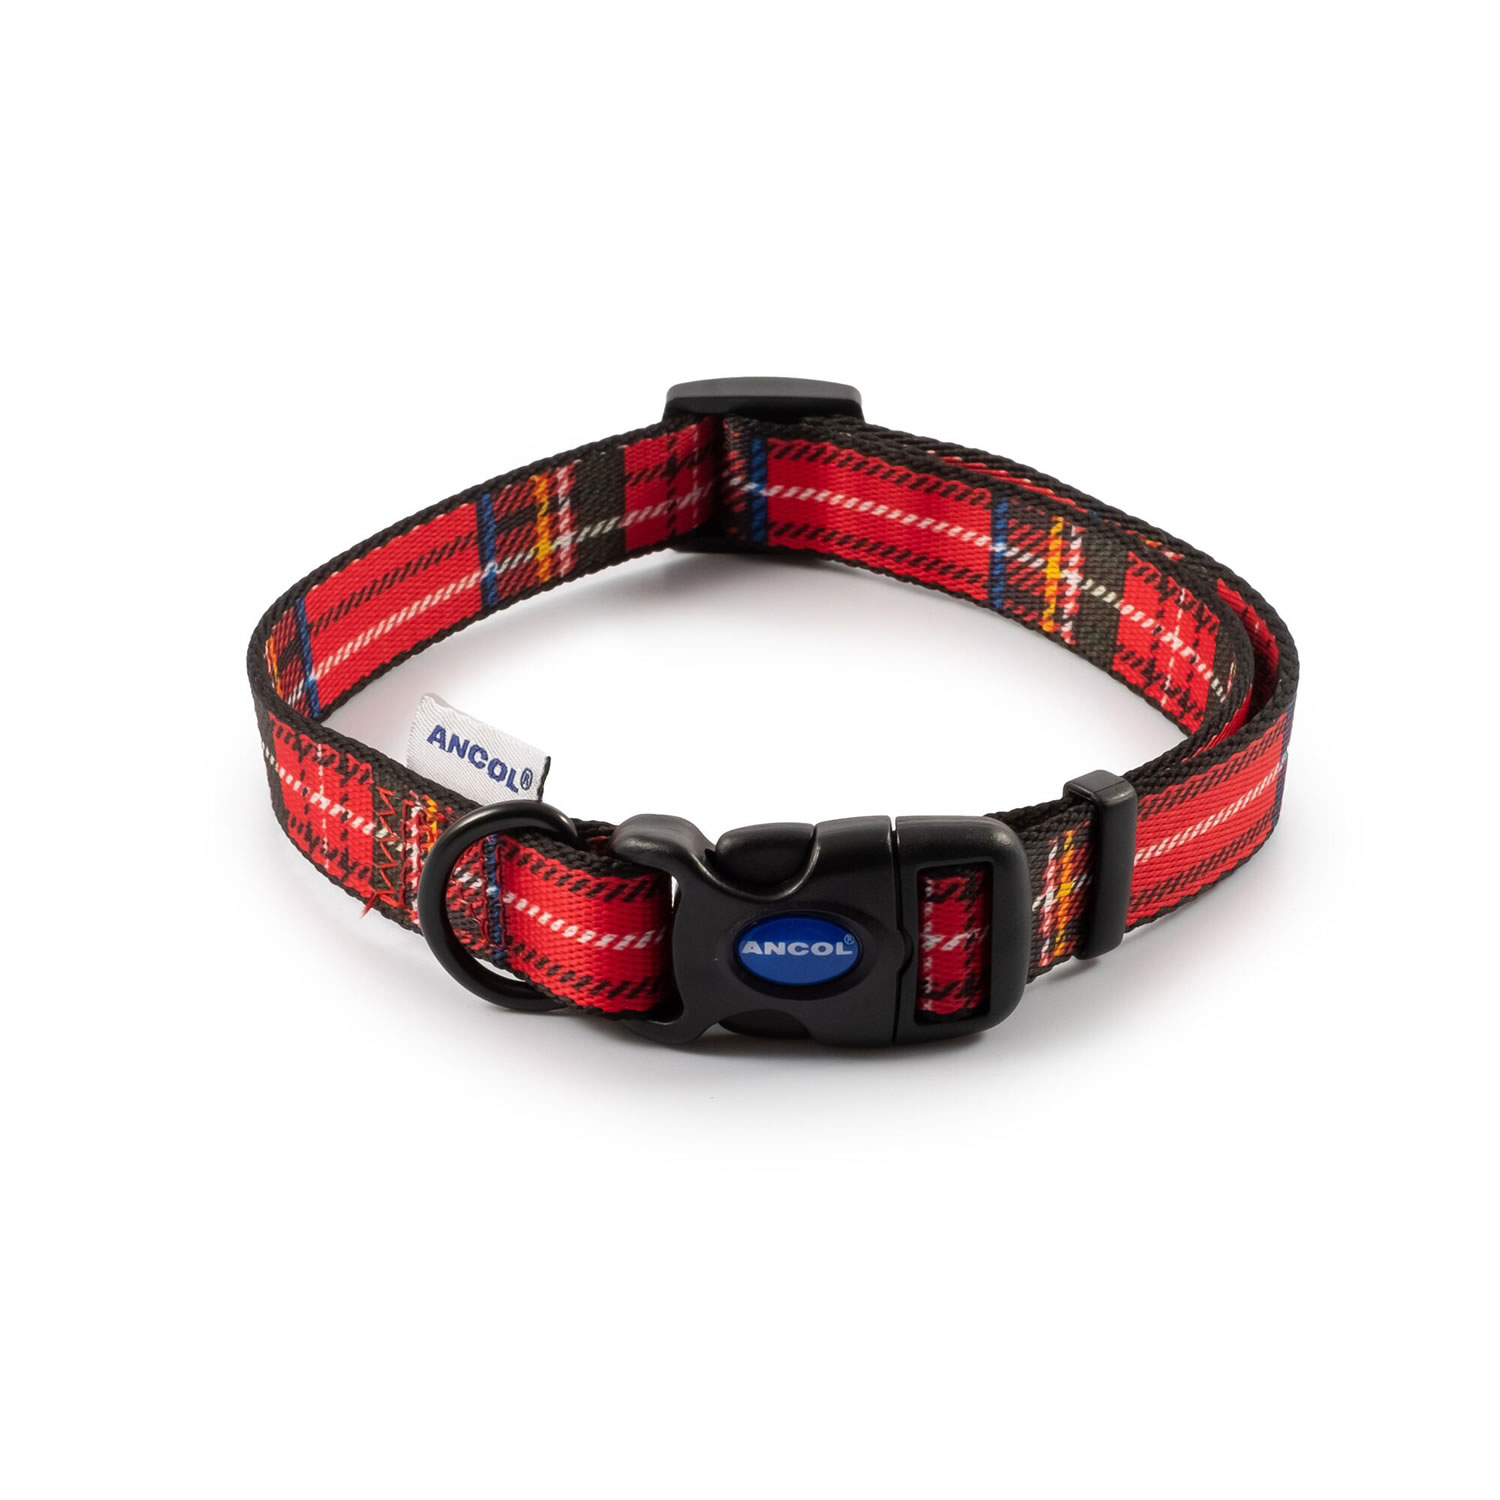 Ancol Patterned Collection Tartan Collar Red - Size 2 - 5 (30 - 50 Cm)